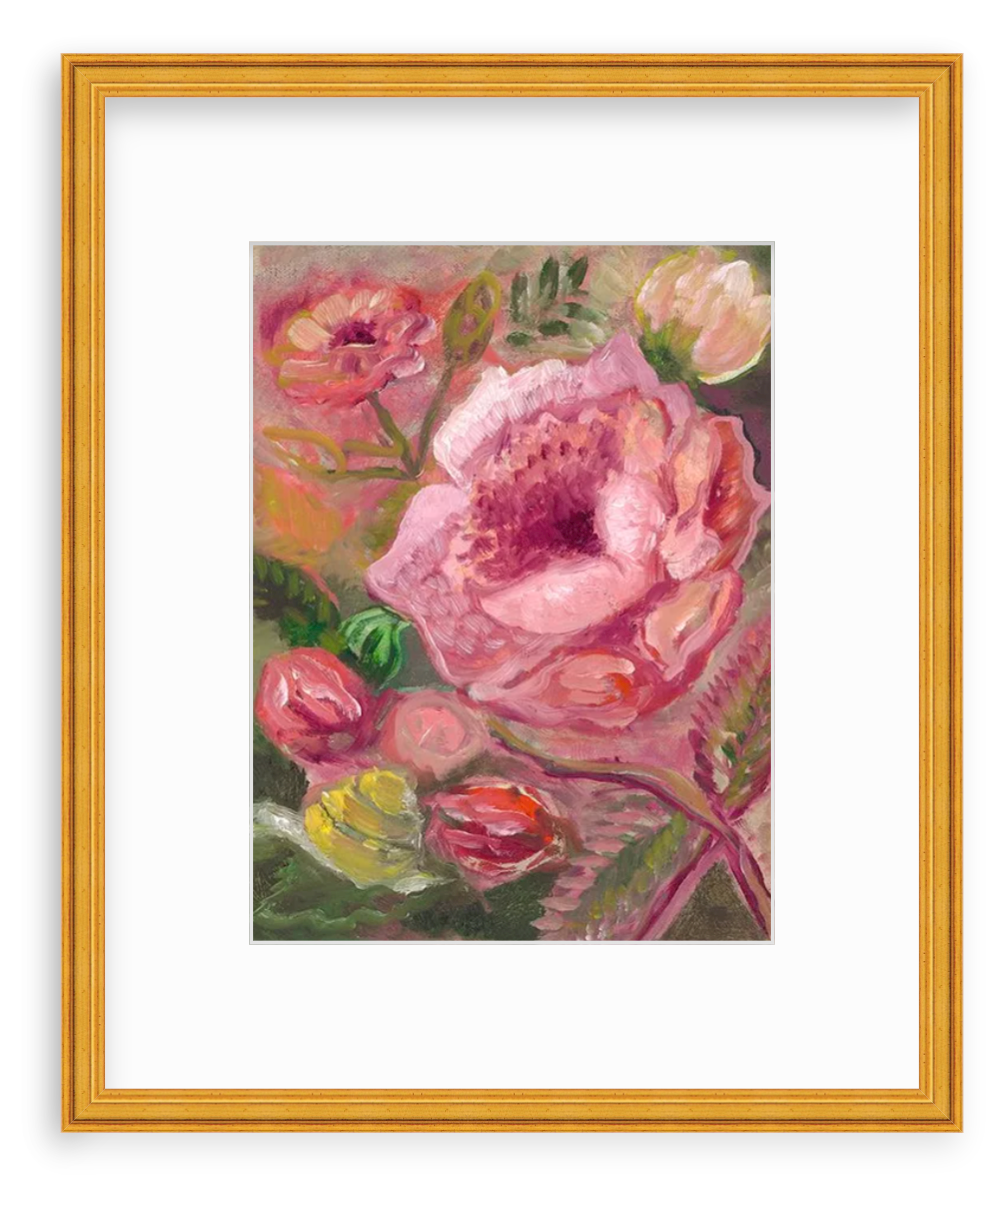 FRAMED PRINT "Rose and Snail" a Vertical Fine Art Giclee Reproduction